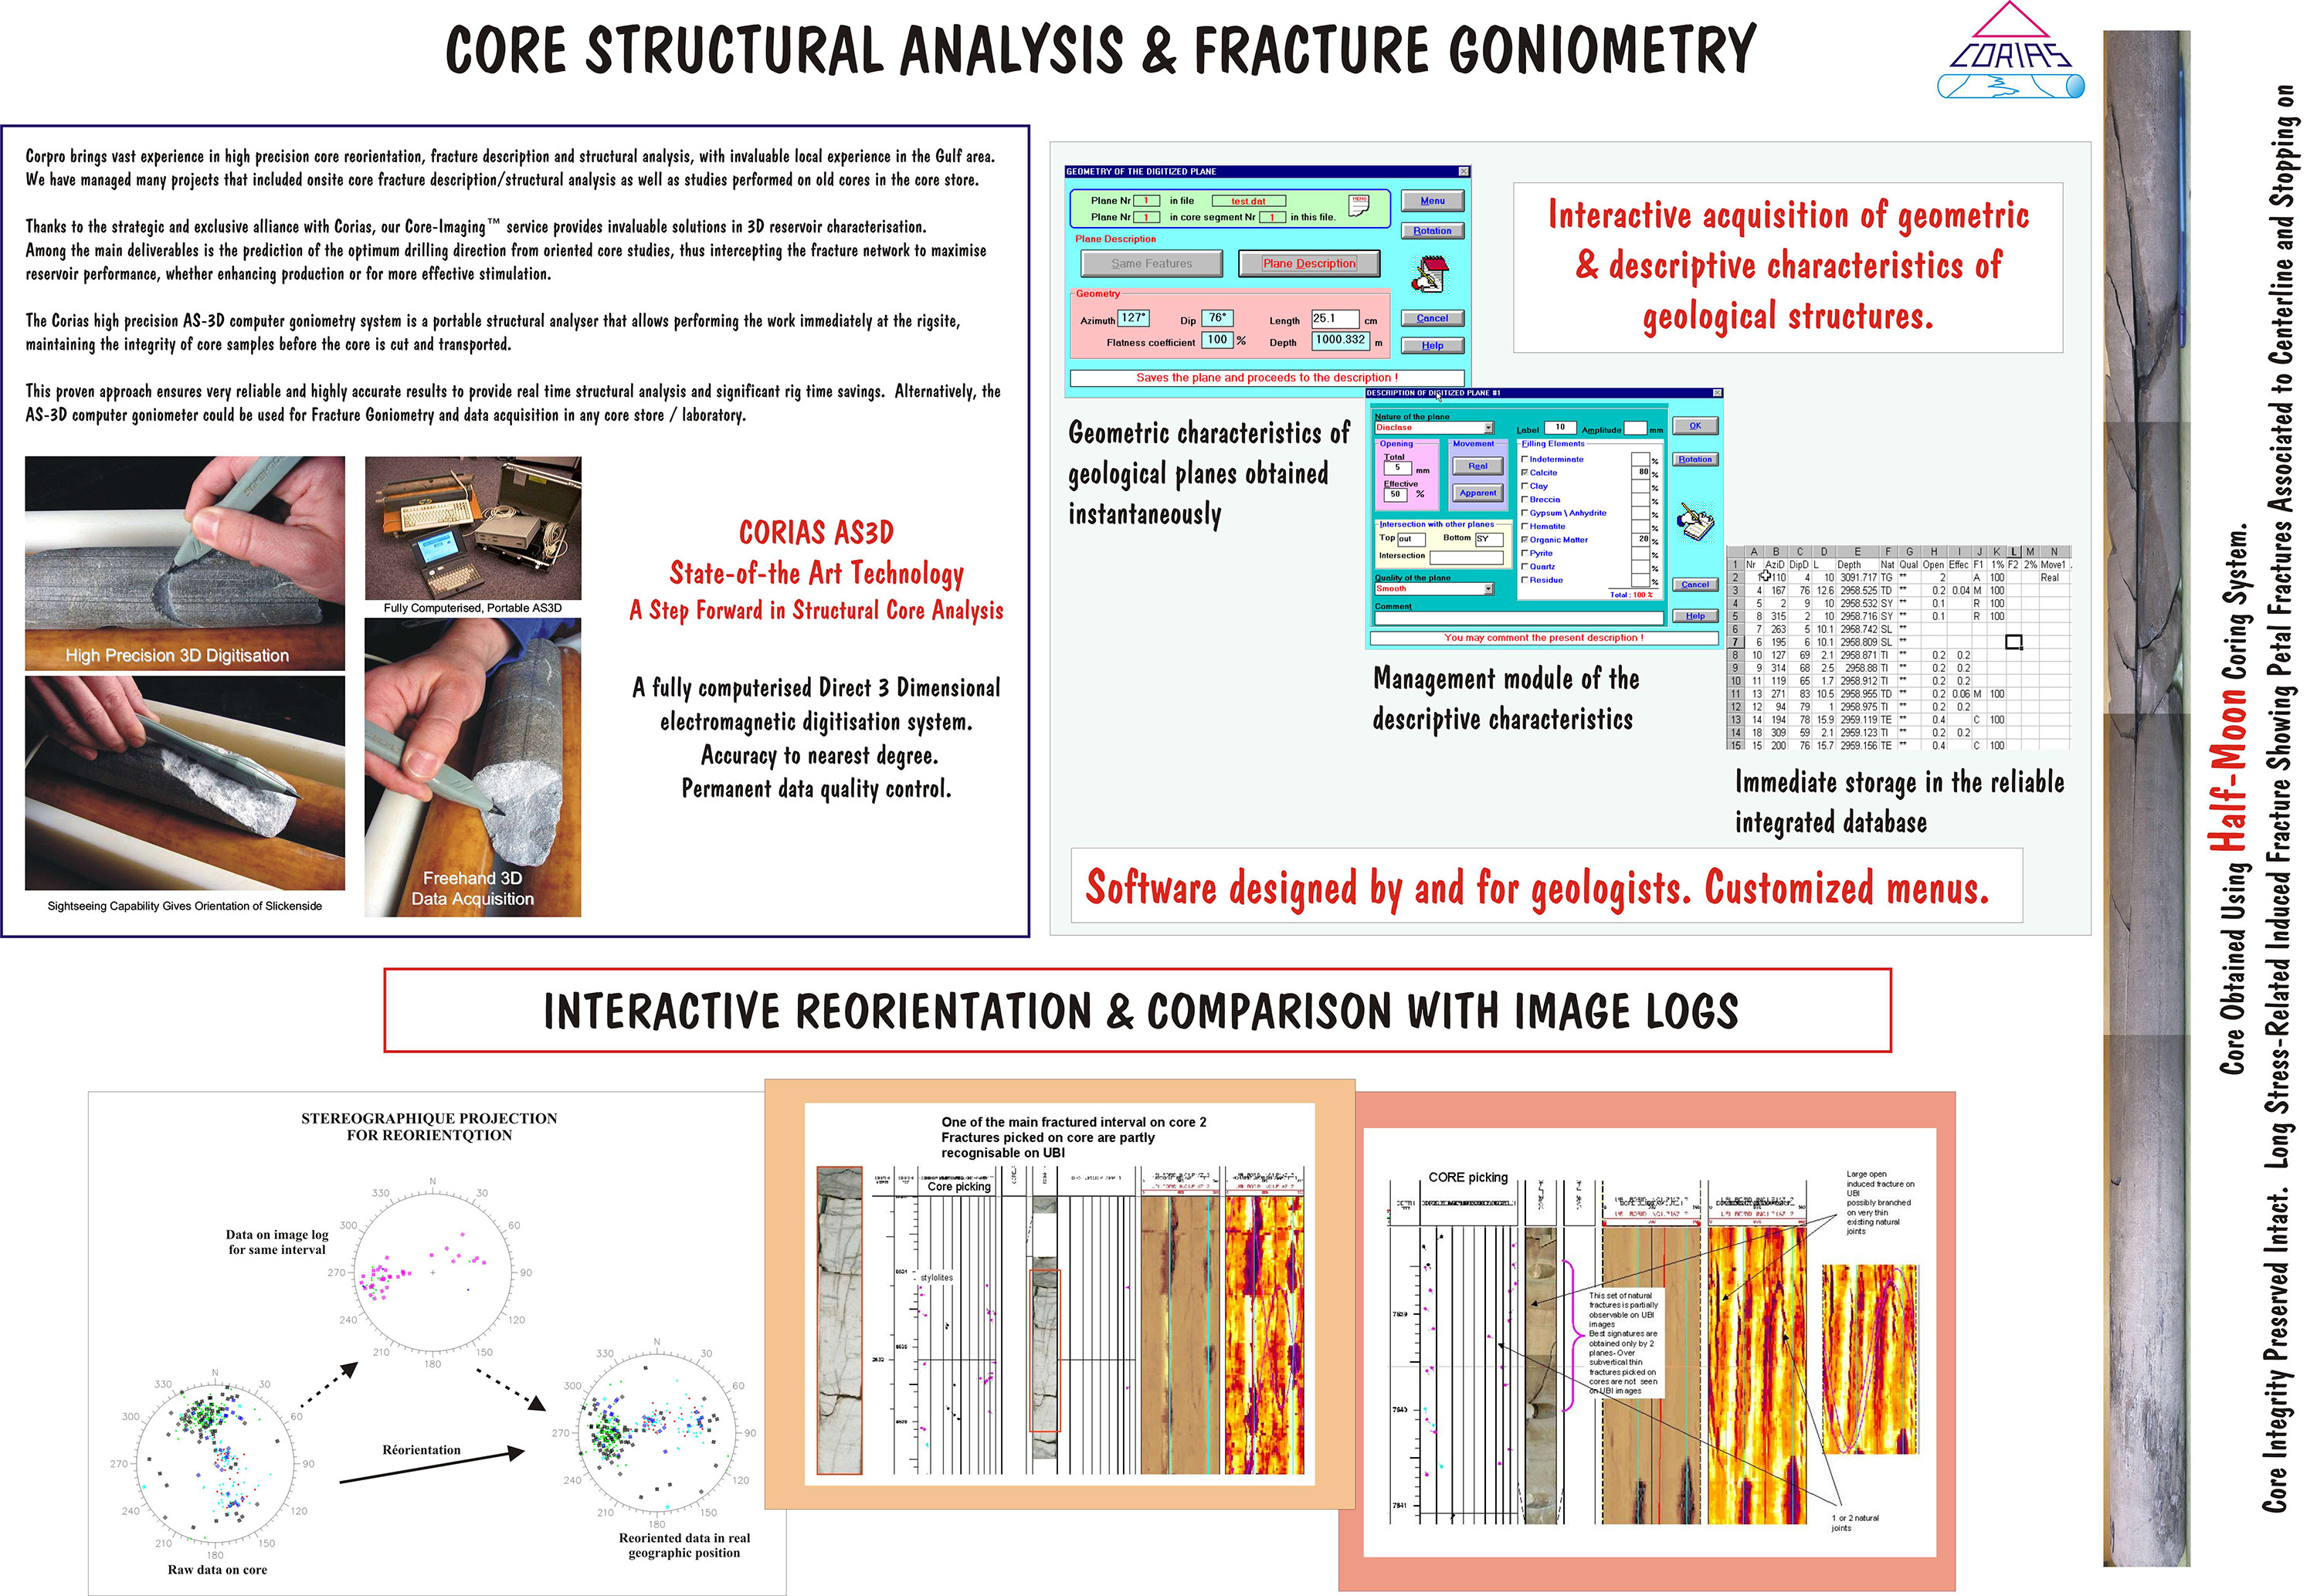 Corias Core structural analysis and fracture goniometry